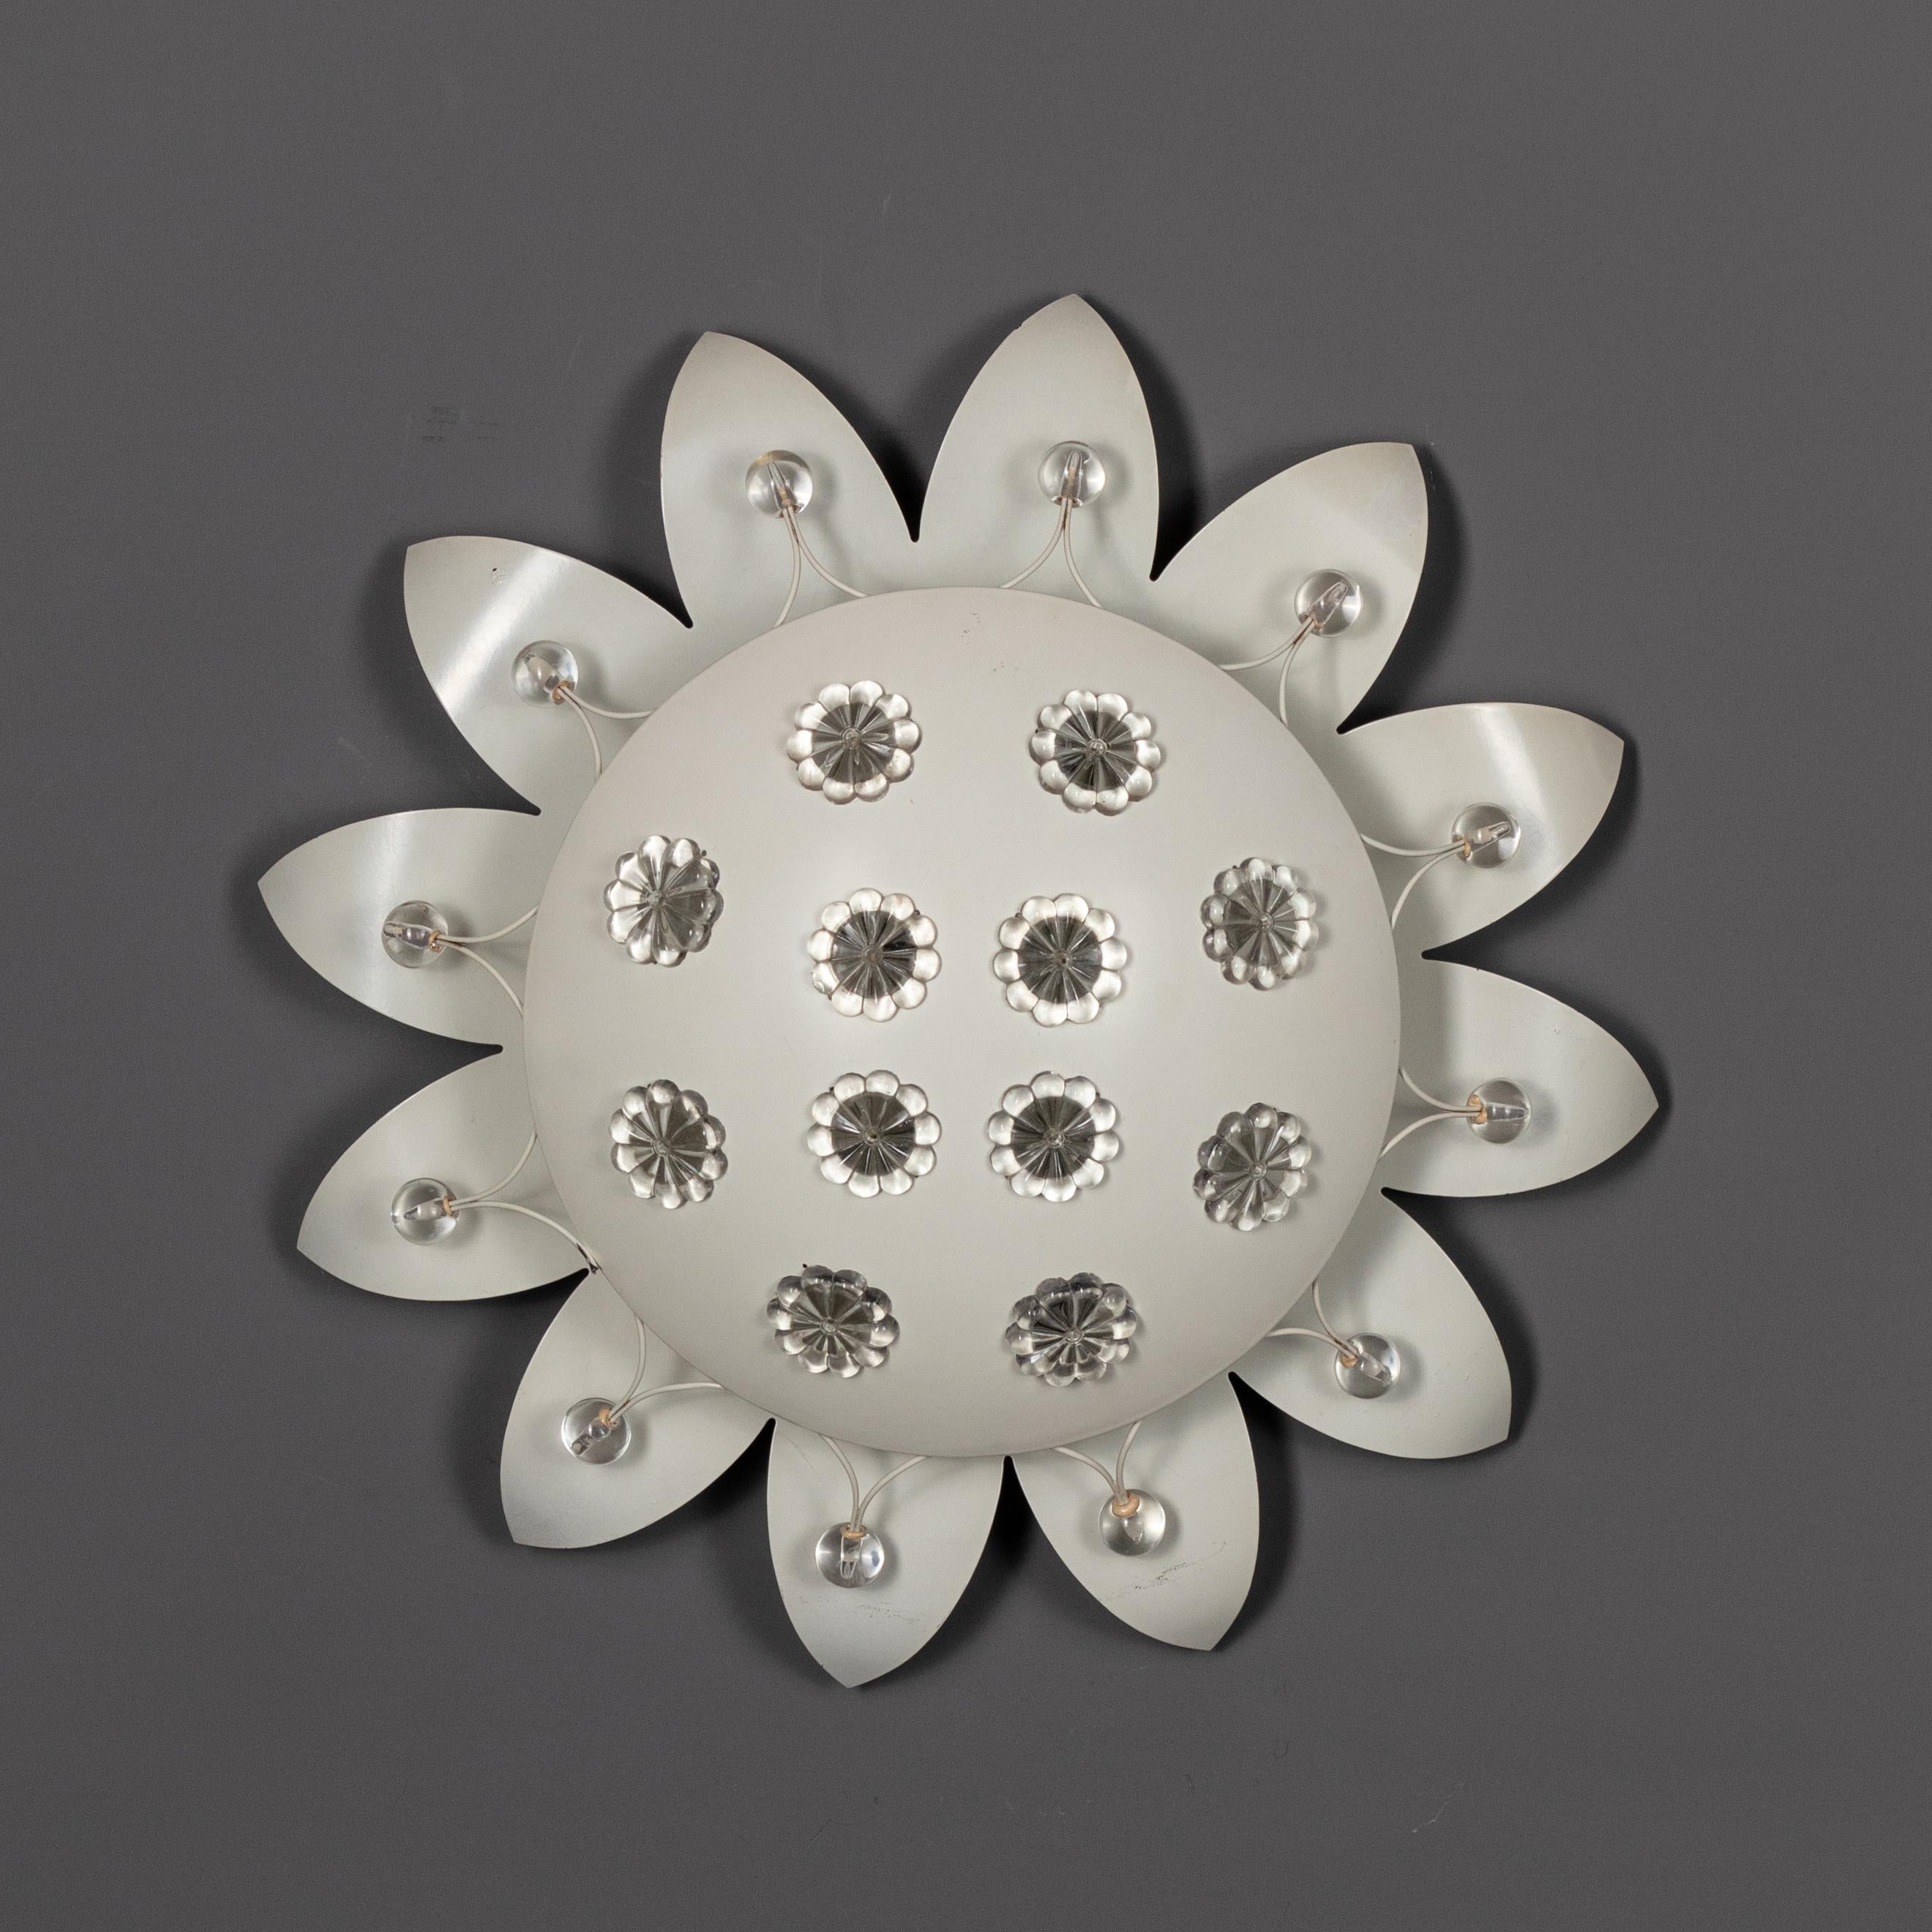 This Vienna sconce was designed by Emil Stejnar. A well known designer for his recognizable star-shaped designs in the 1950s.
White steel lacquered perforated shade with 10 small daisy flowers in the gaps, white wire steel rim with 12 faceted glass